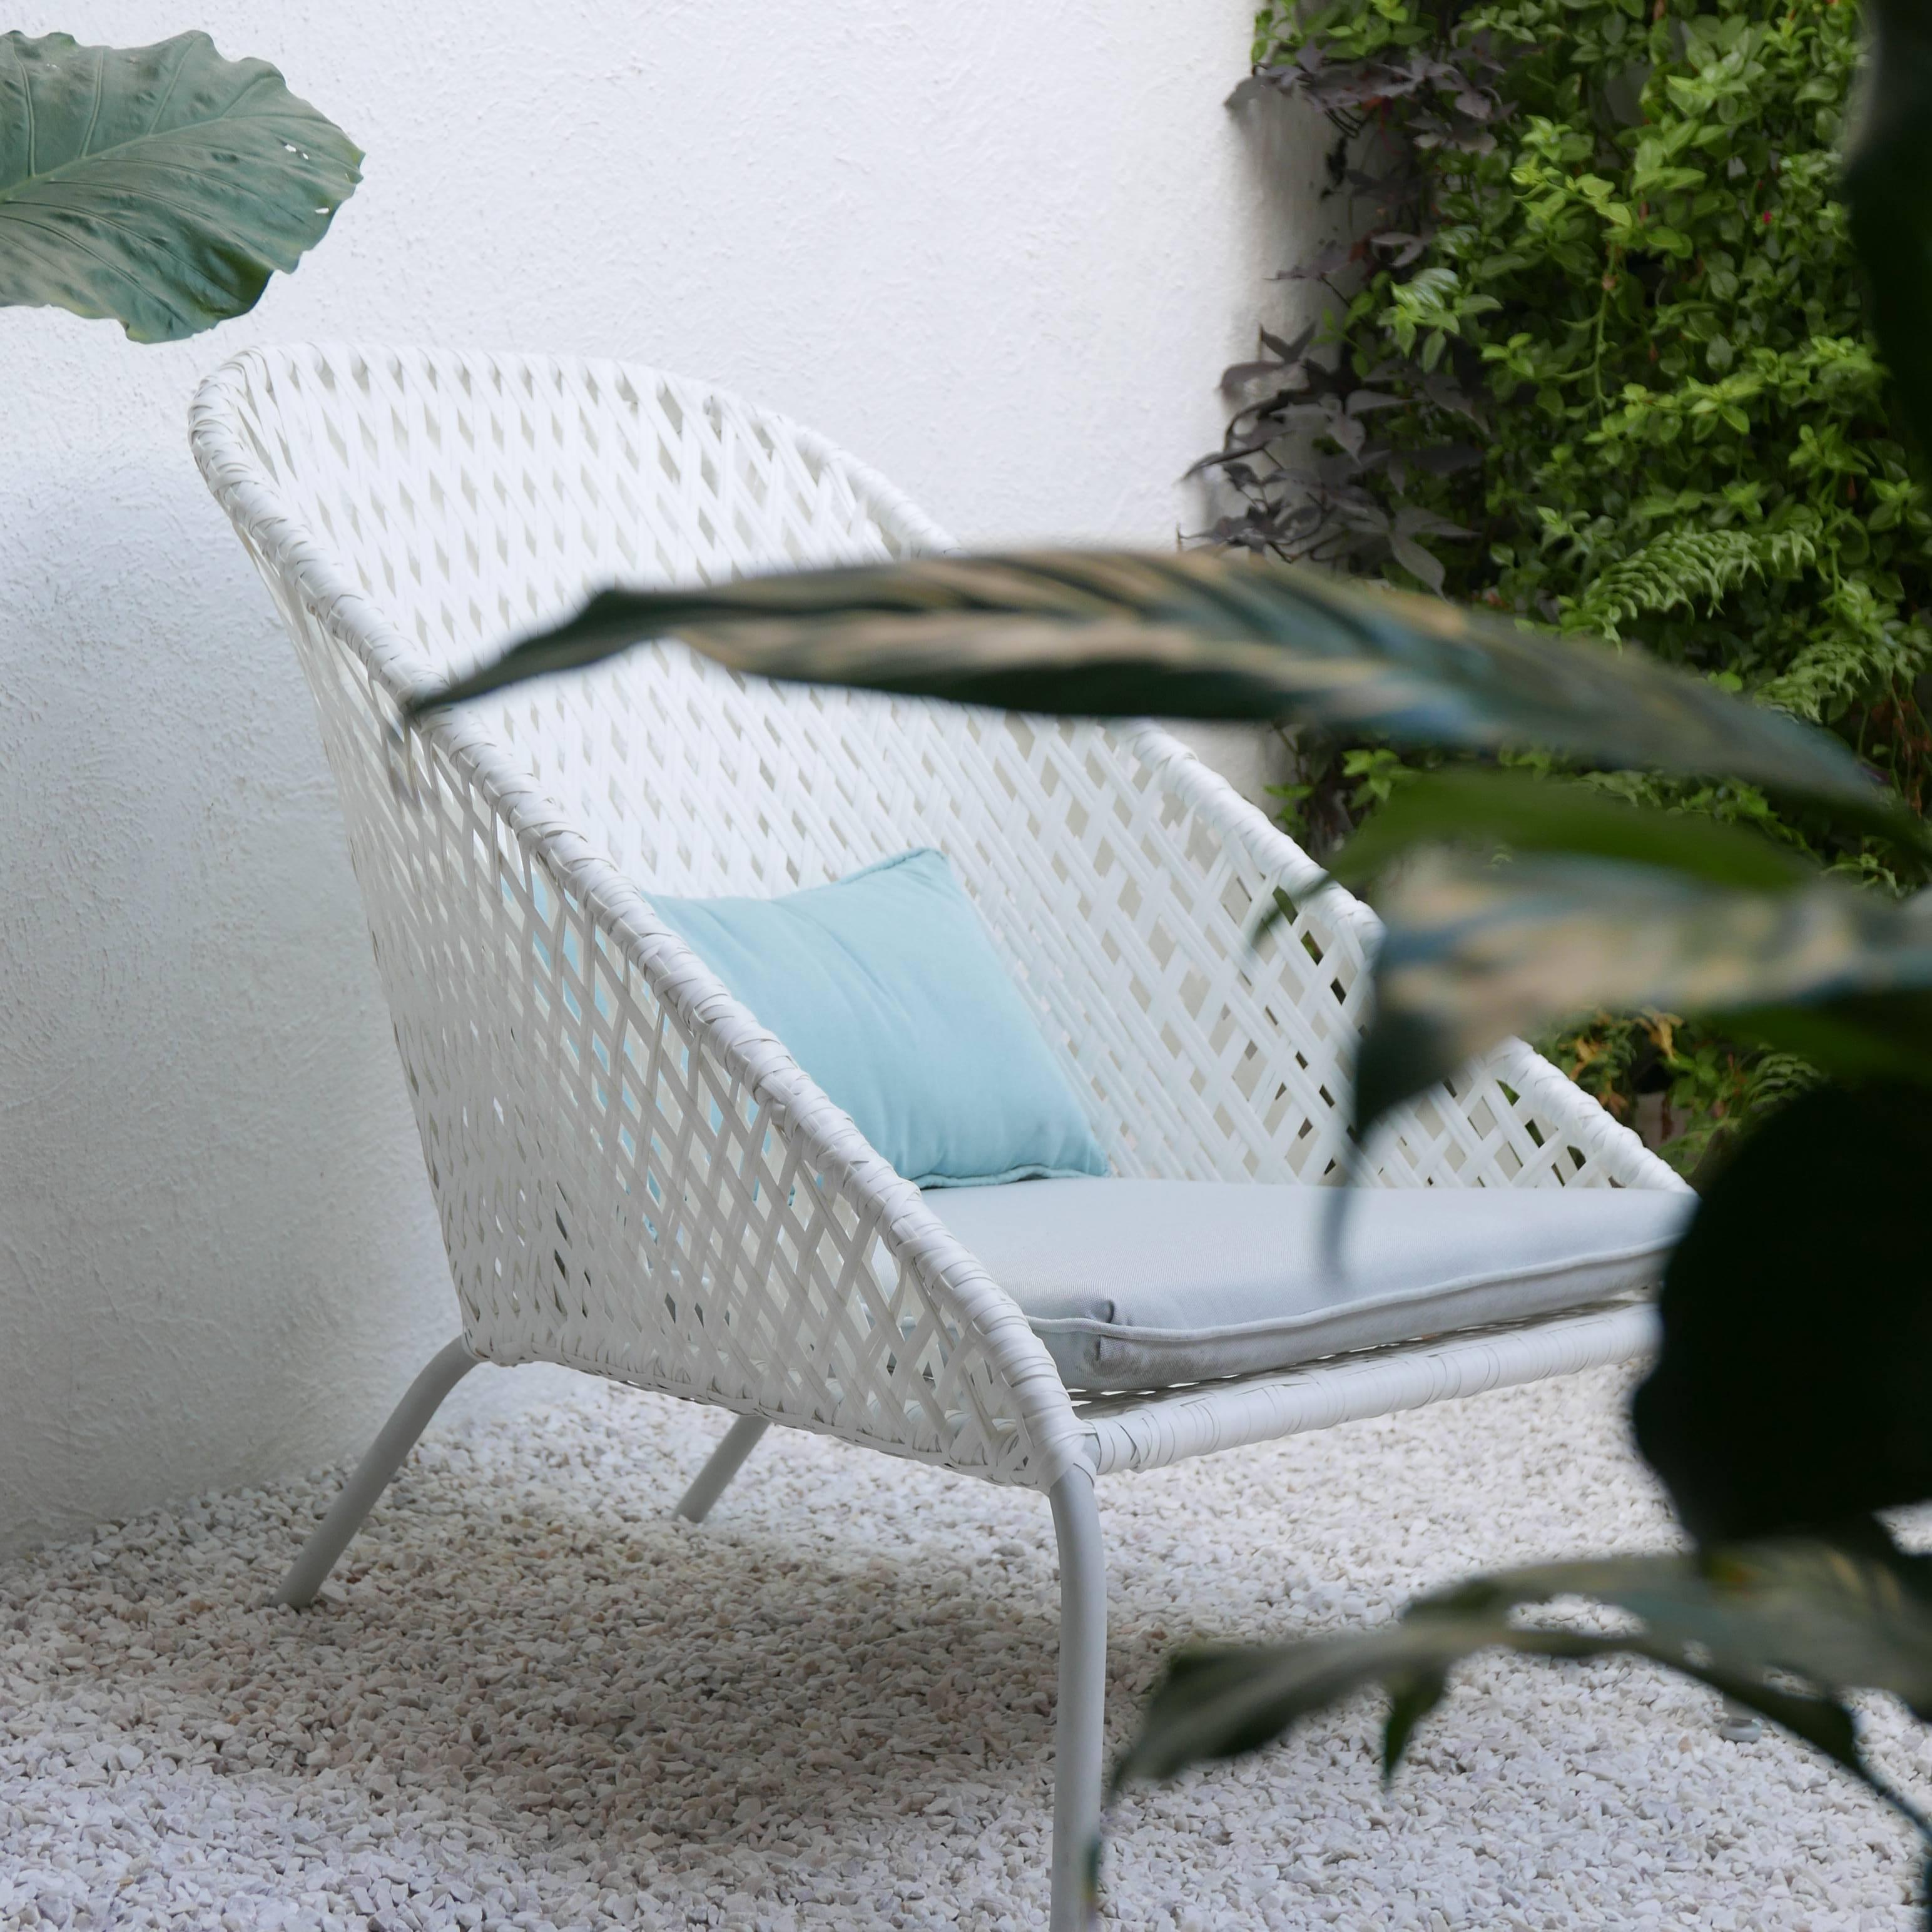 A spacious and low lounge chair perfect for resting and relaxing. Combines synthetic weaving technique with an aluminium light structure perfect for outdoor living.

“Tumbona” is total comfort. The lounge chair's concave shape embraces you naturally